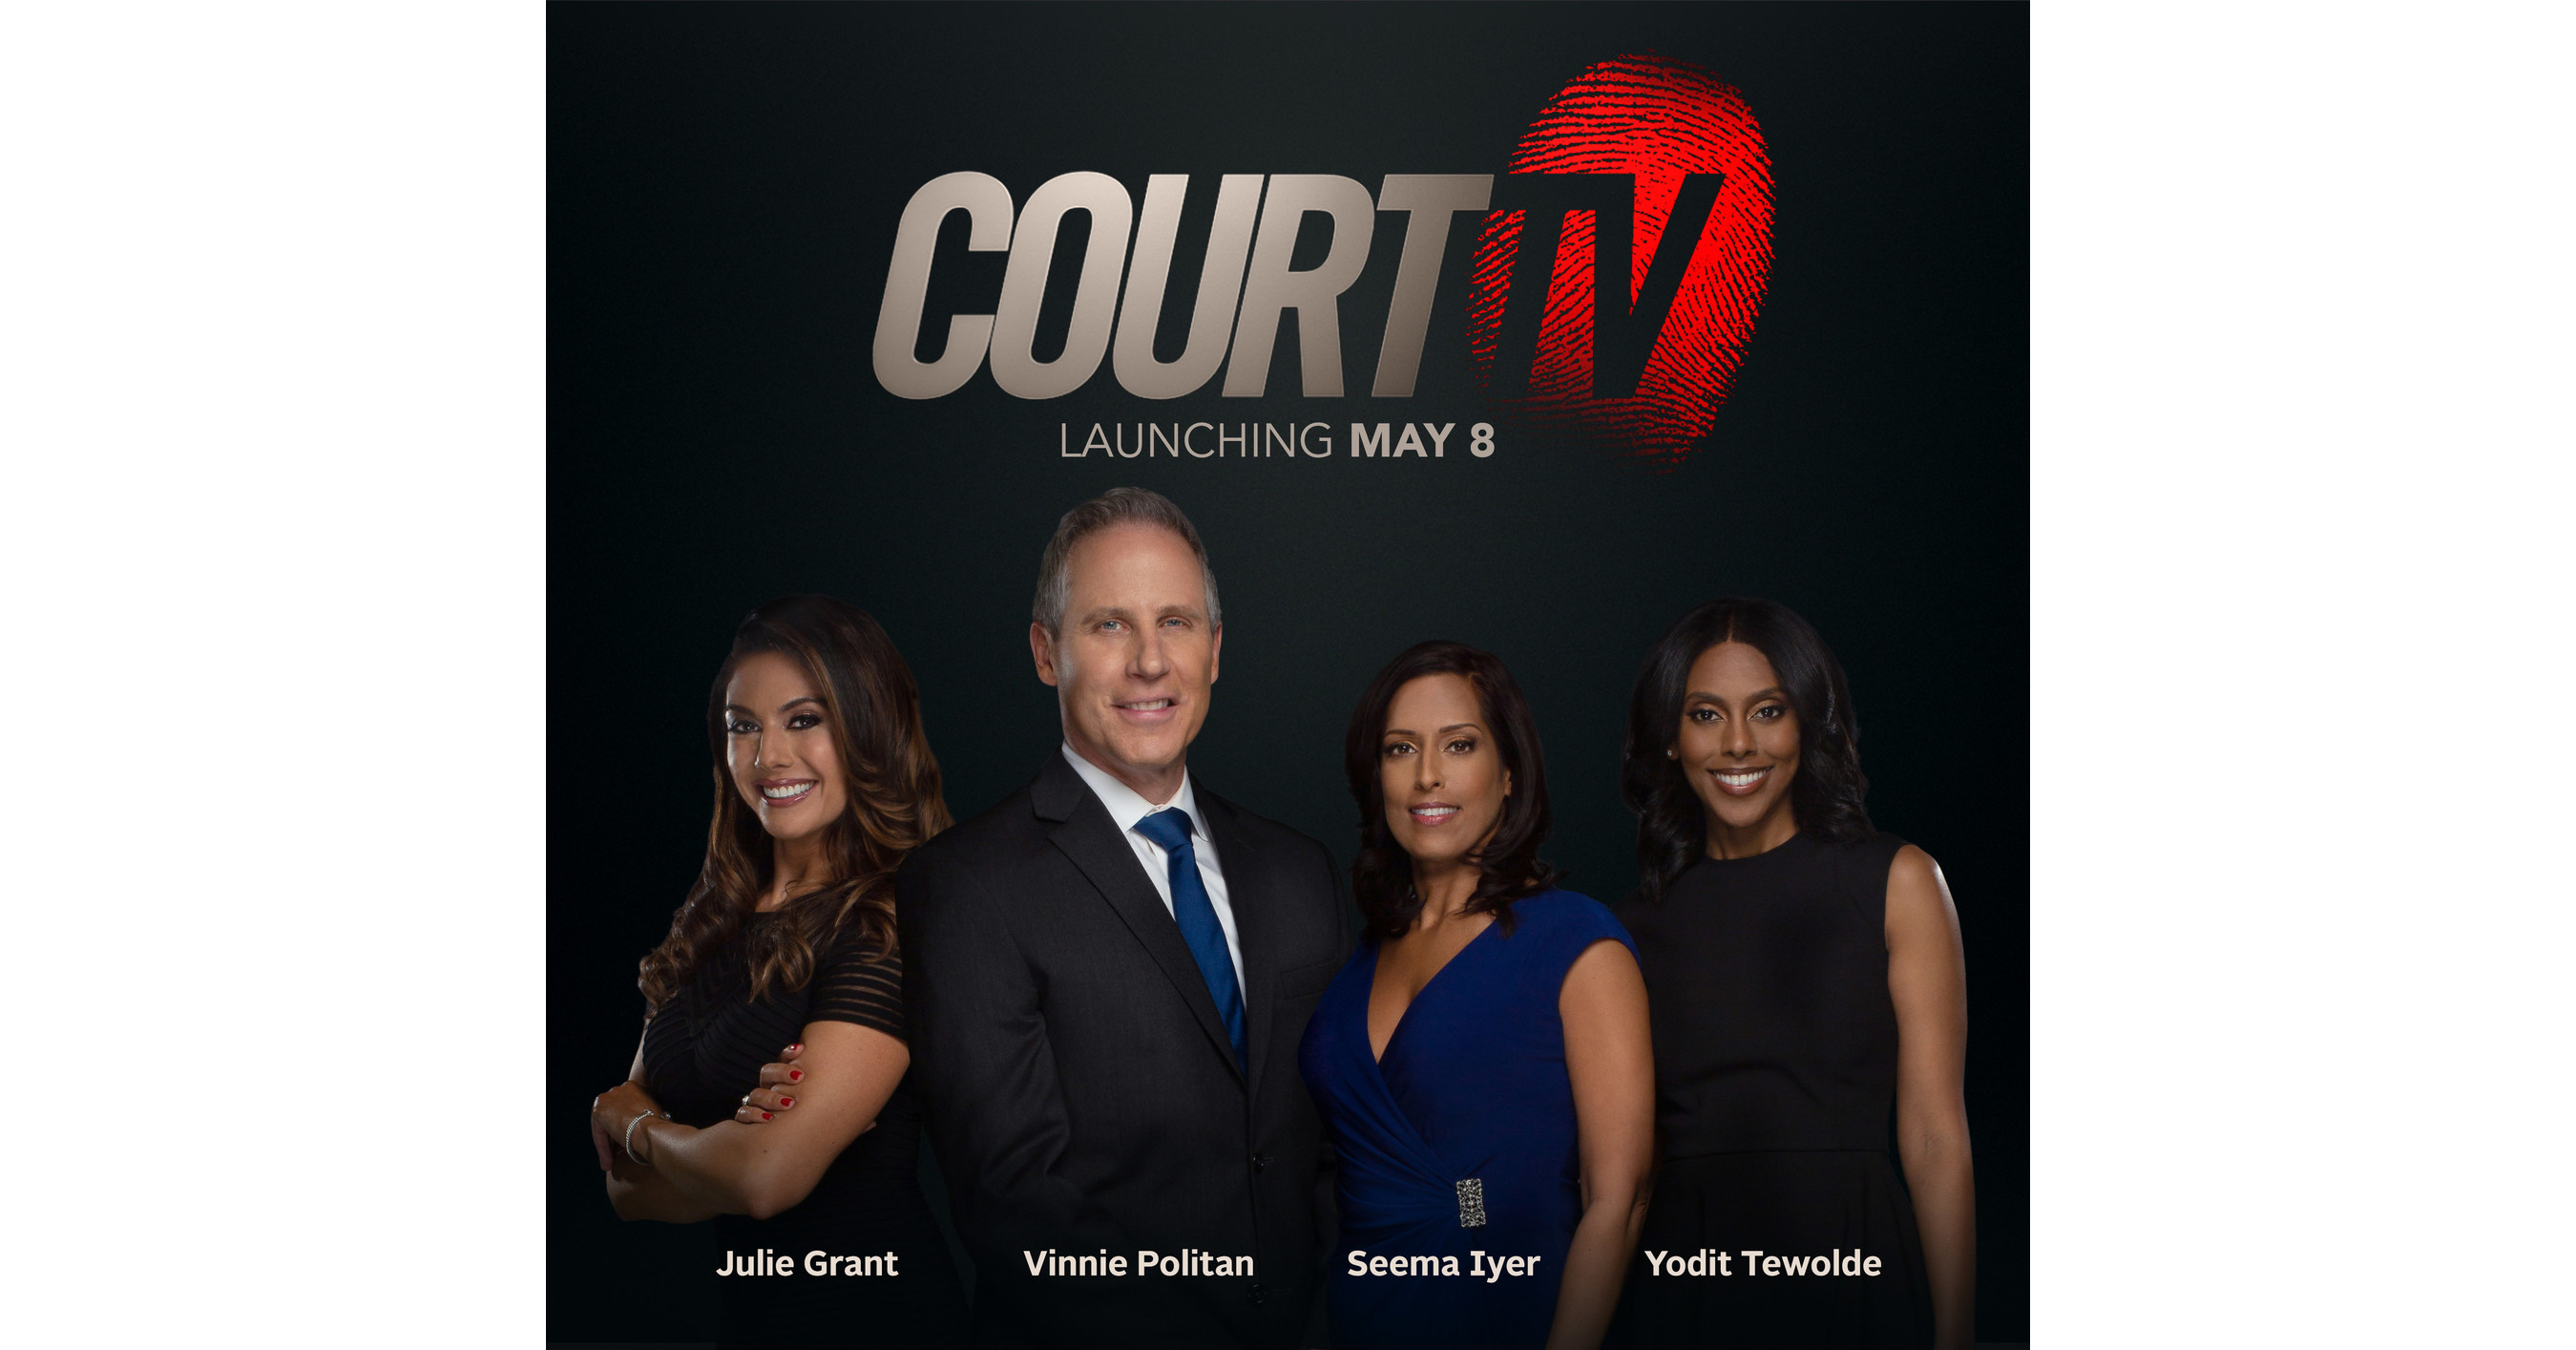 Court TV Adds More MultiPlatform Distribution As Iconic Brand Readies